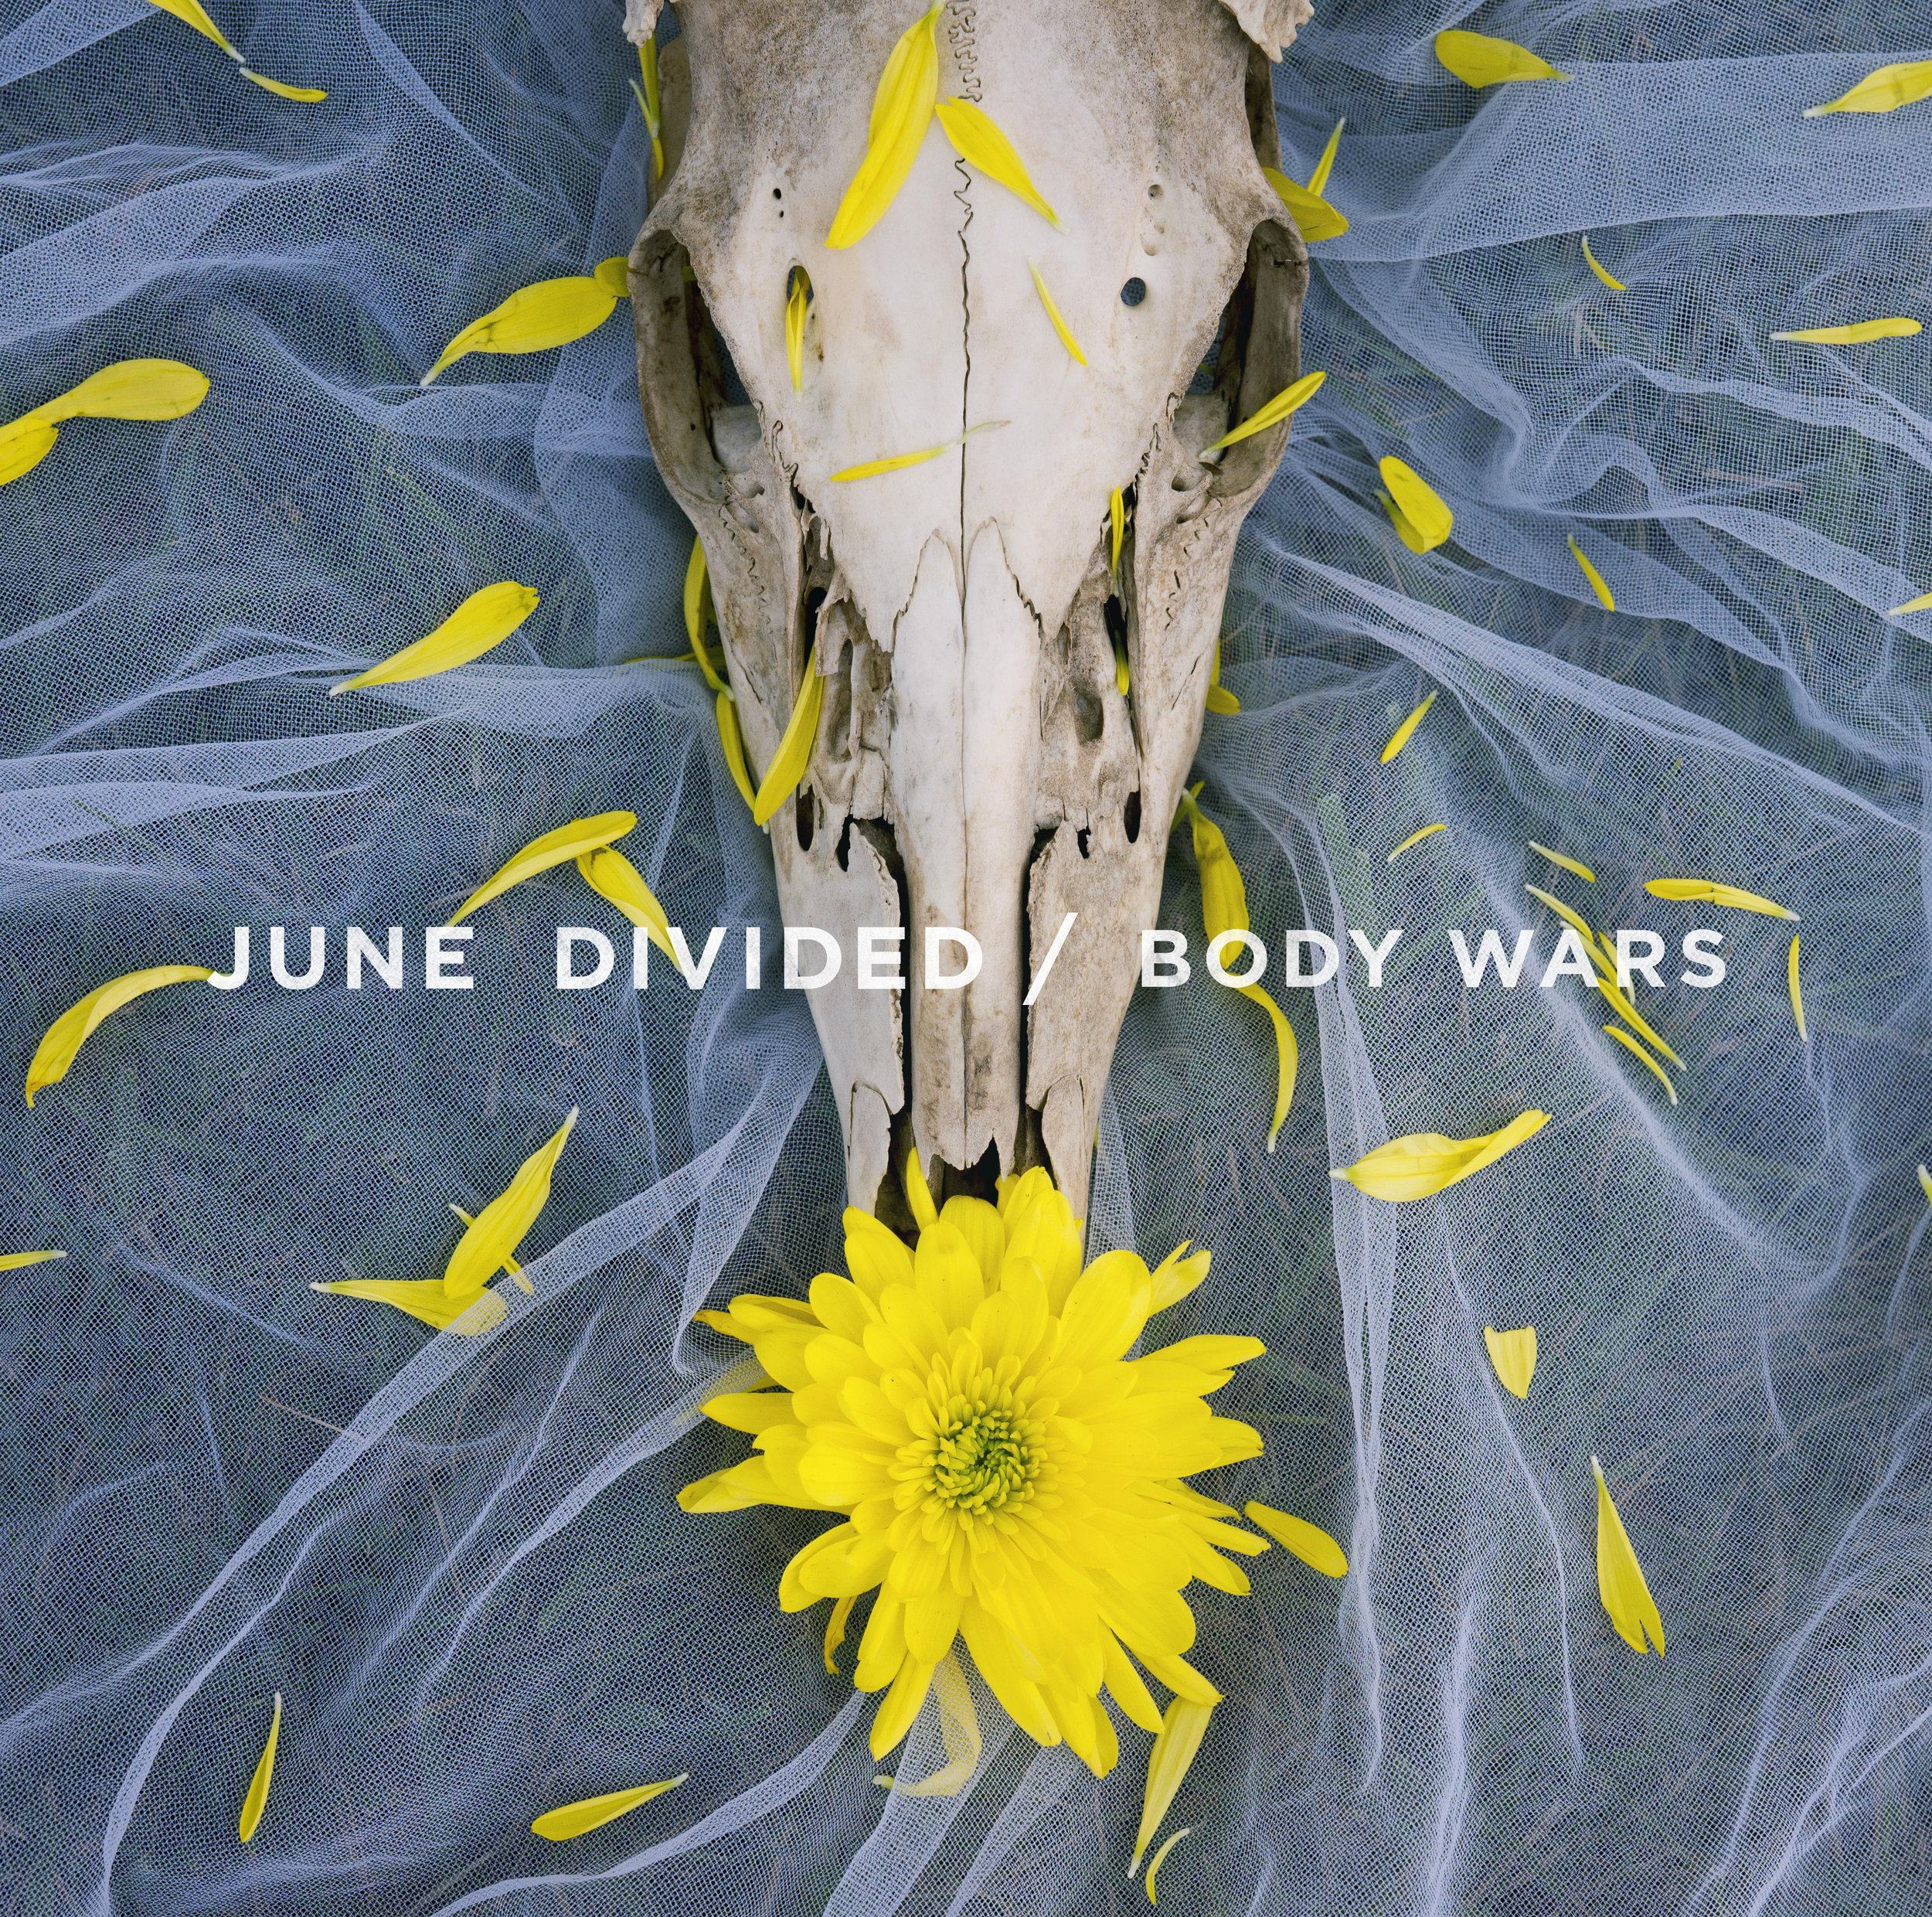 June Divided - Body Wars